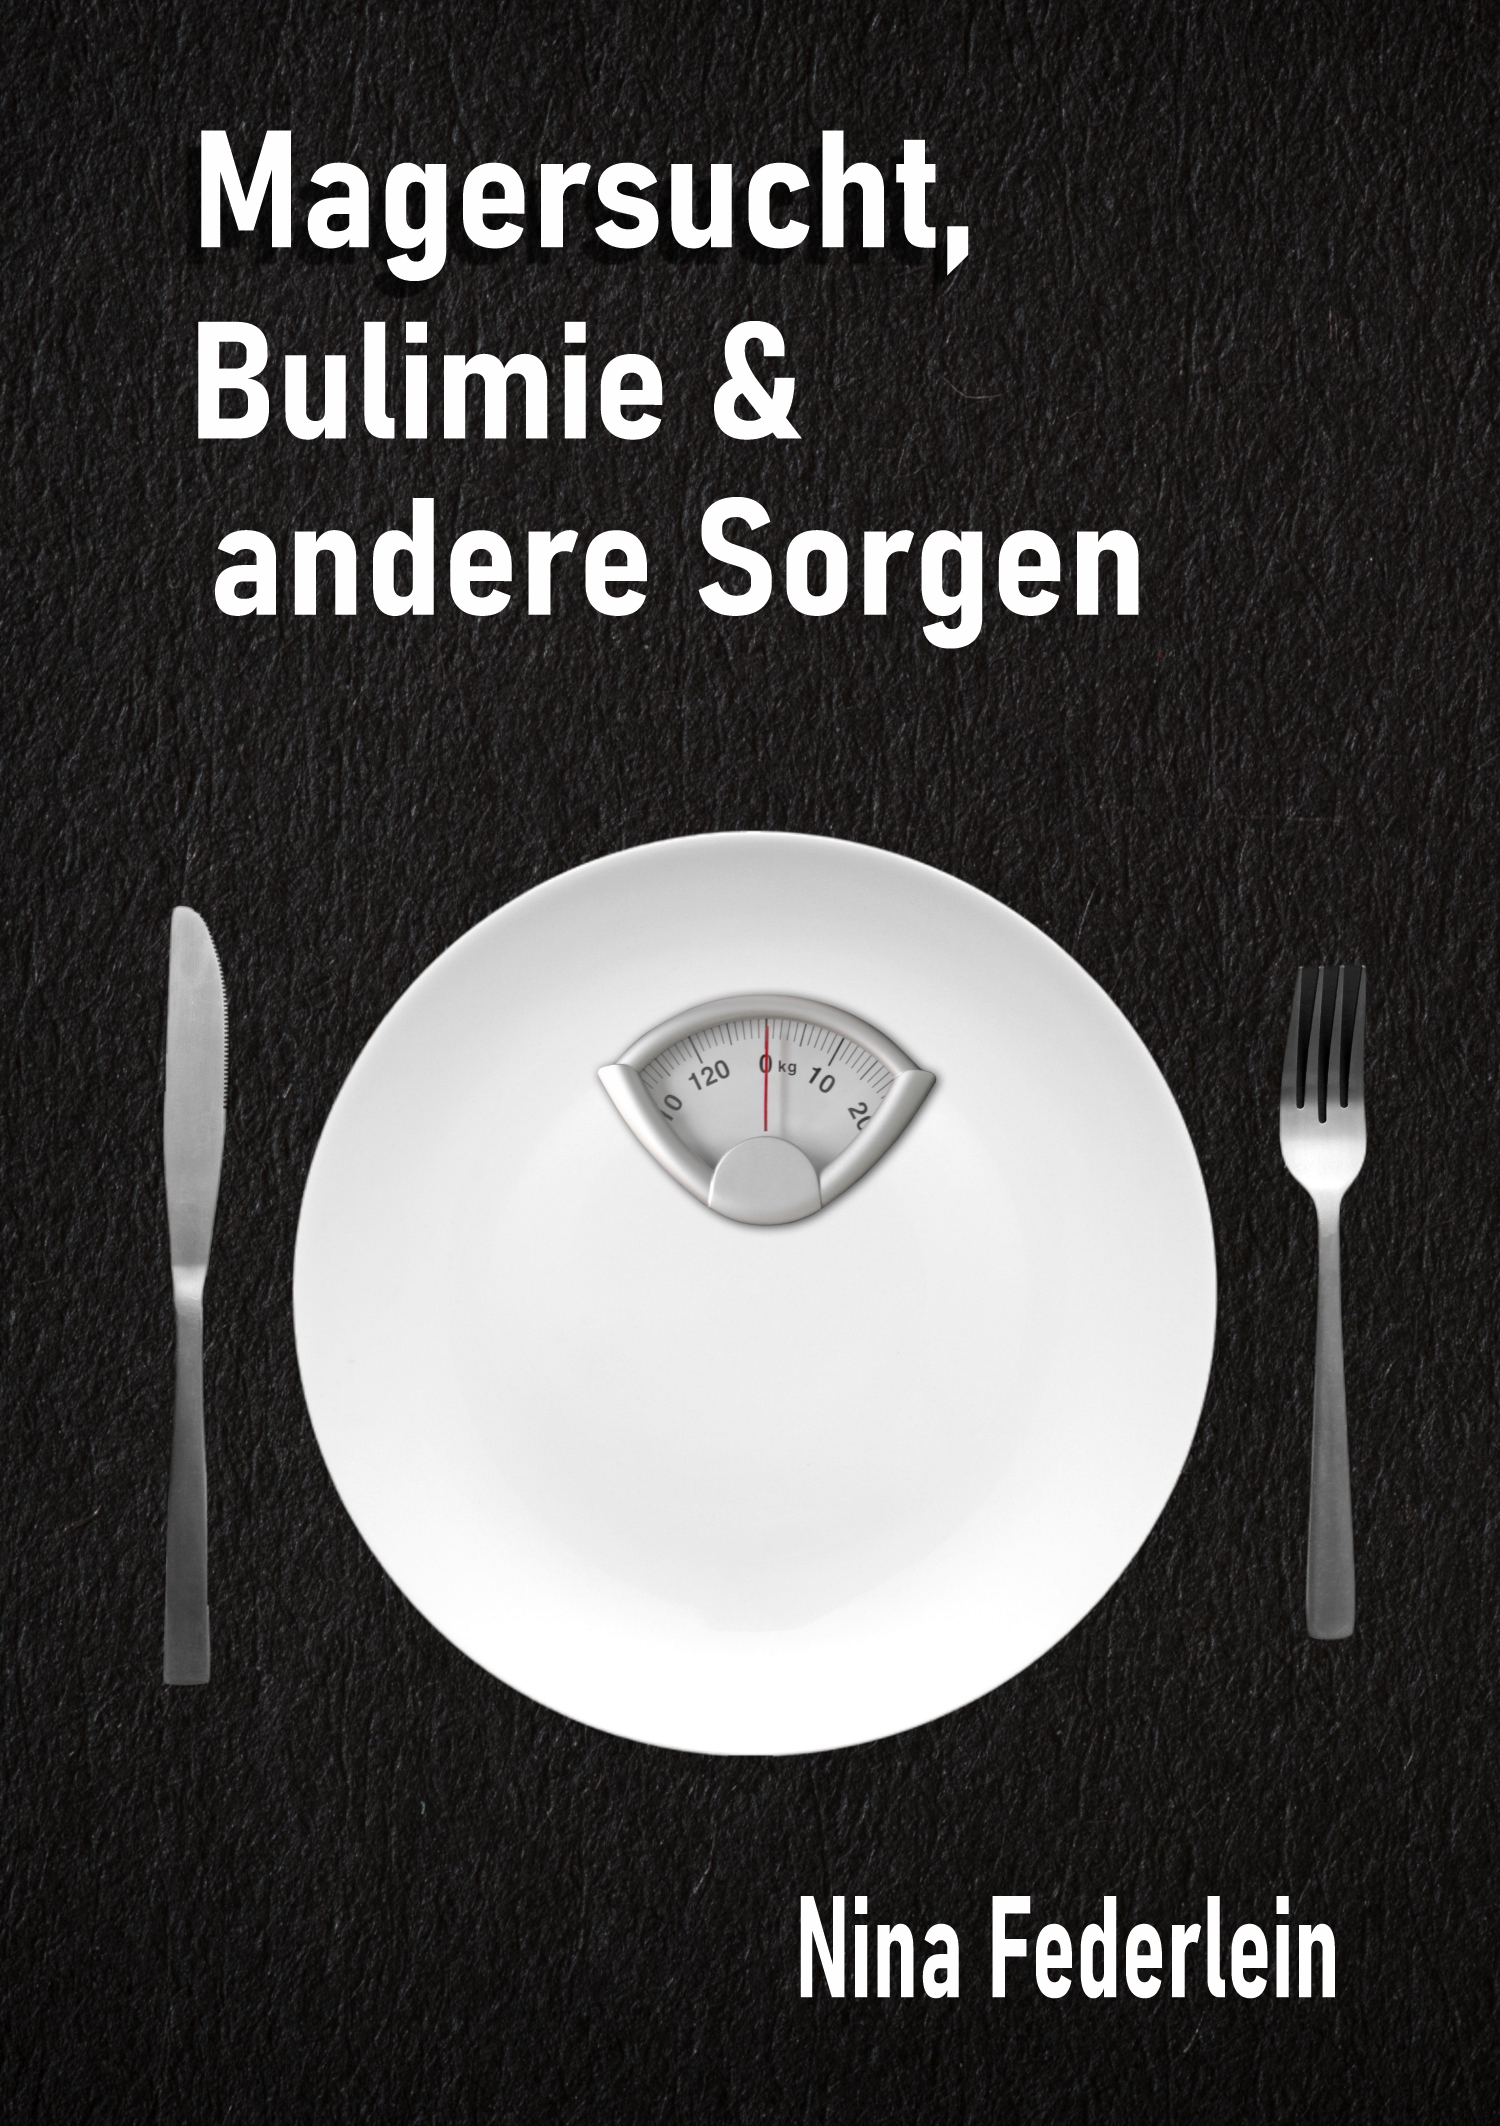 Magersucht, Bulimie & andere Sorgen - Cover